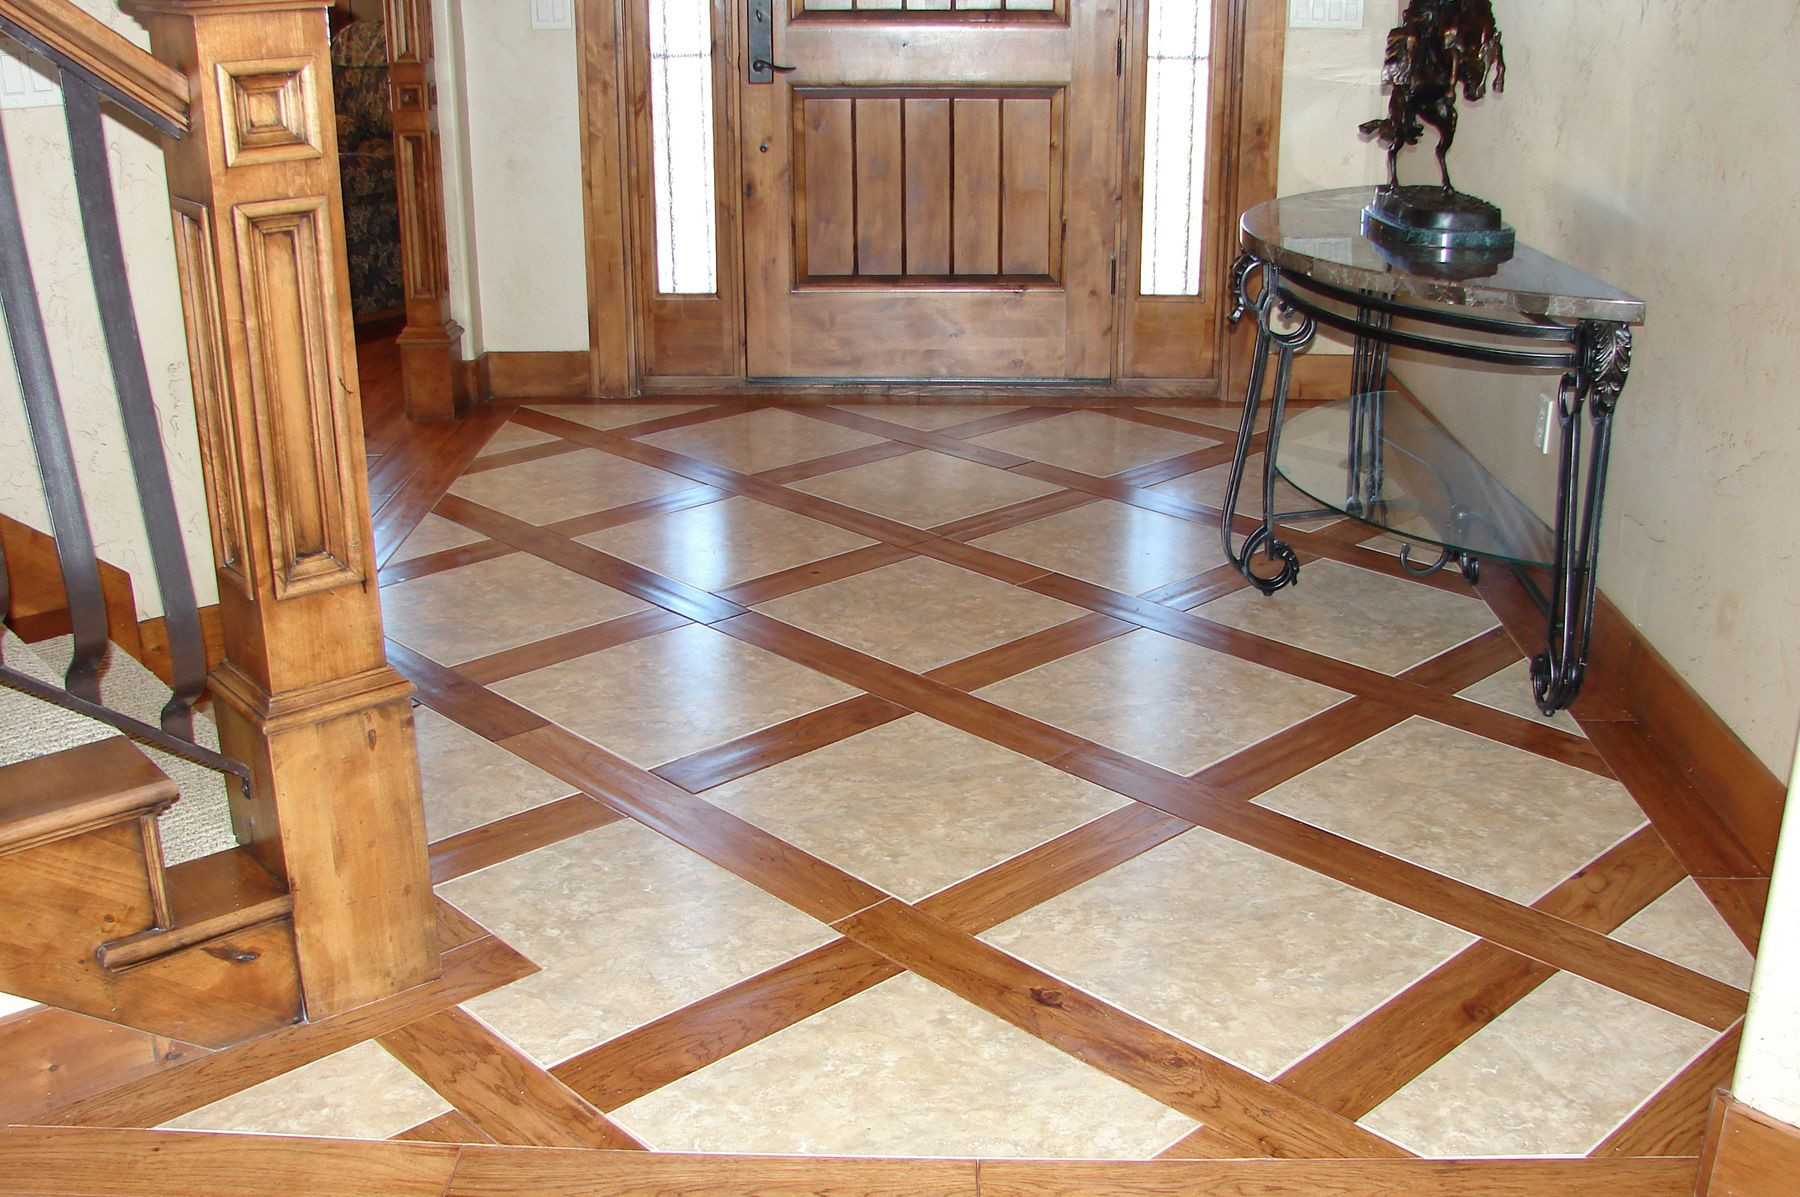 21 Stylish Pictures Of Hardwood and Tile Floors together 2024 free download pictures of hardwood and tile floors together of faux wood floor tiles with tile inserts very creative and lovely for faux wood floor tiles with tile inserts very creative and lovely descrip